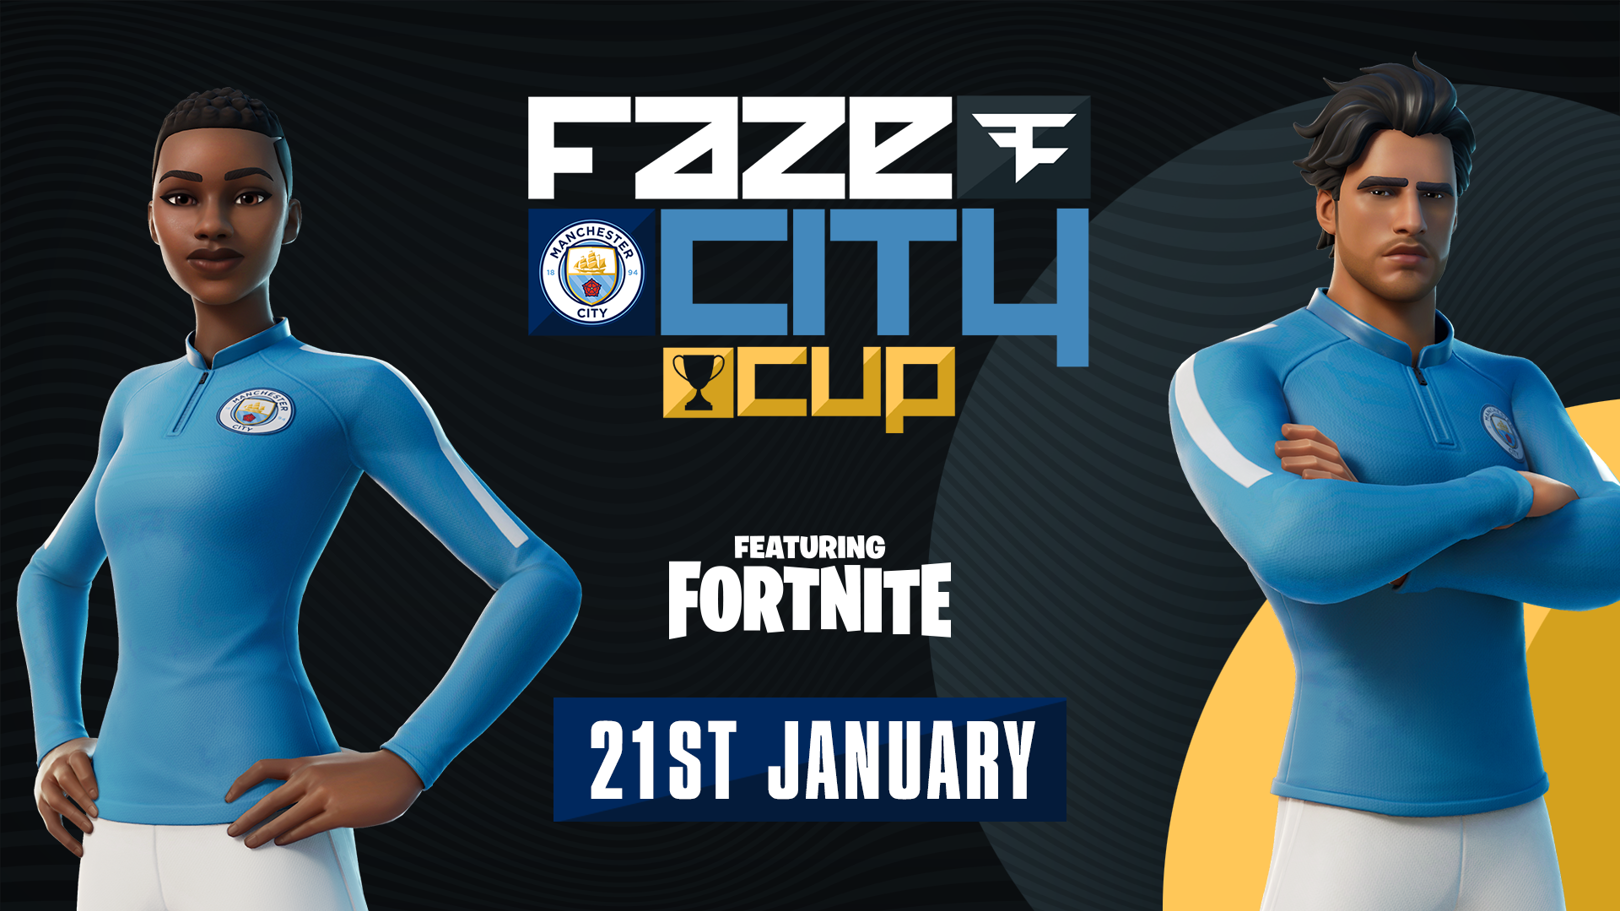 City collaborate with FaZe Clan to bring football to Fortnite